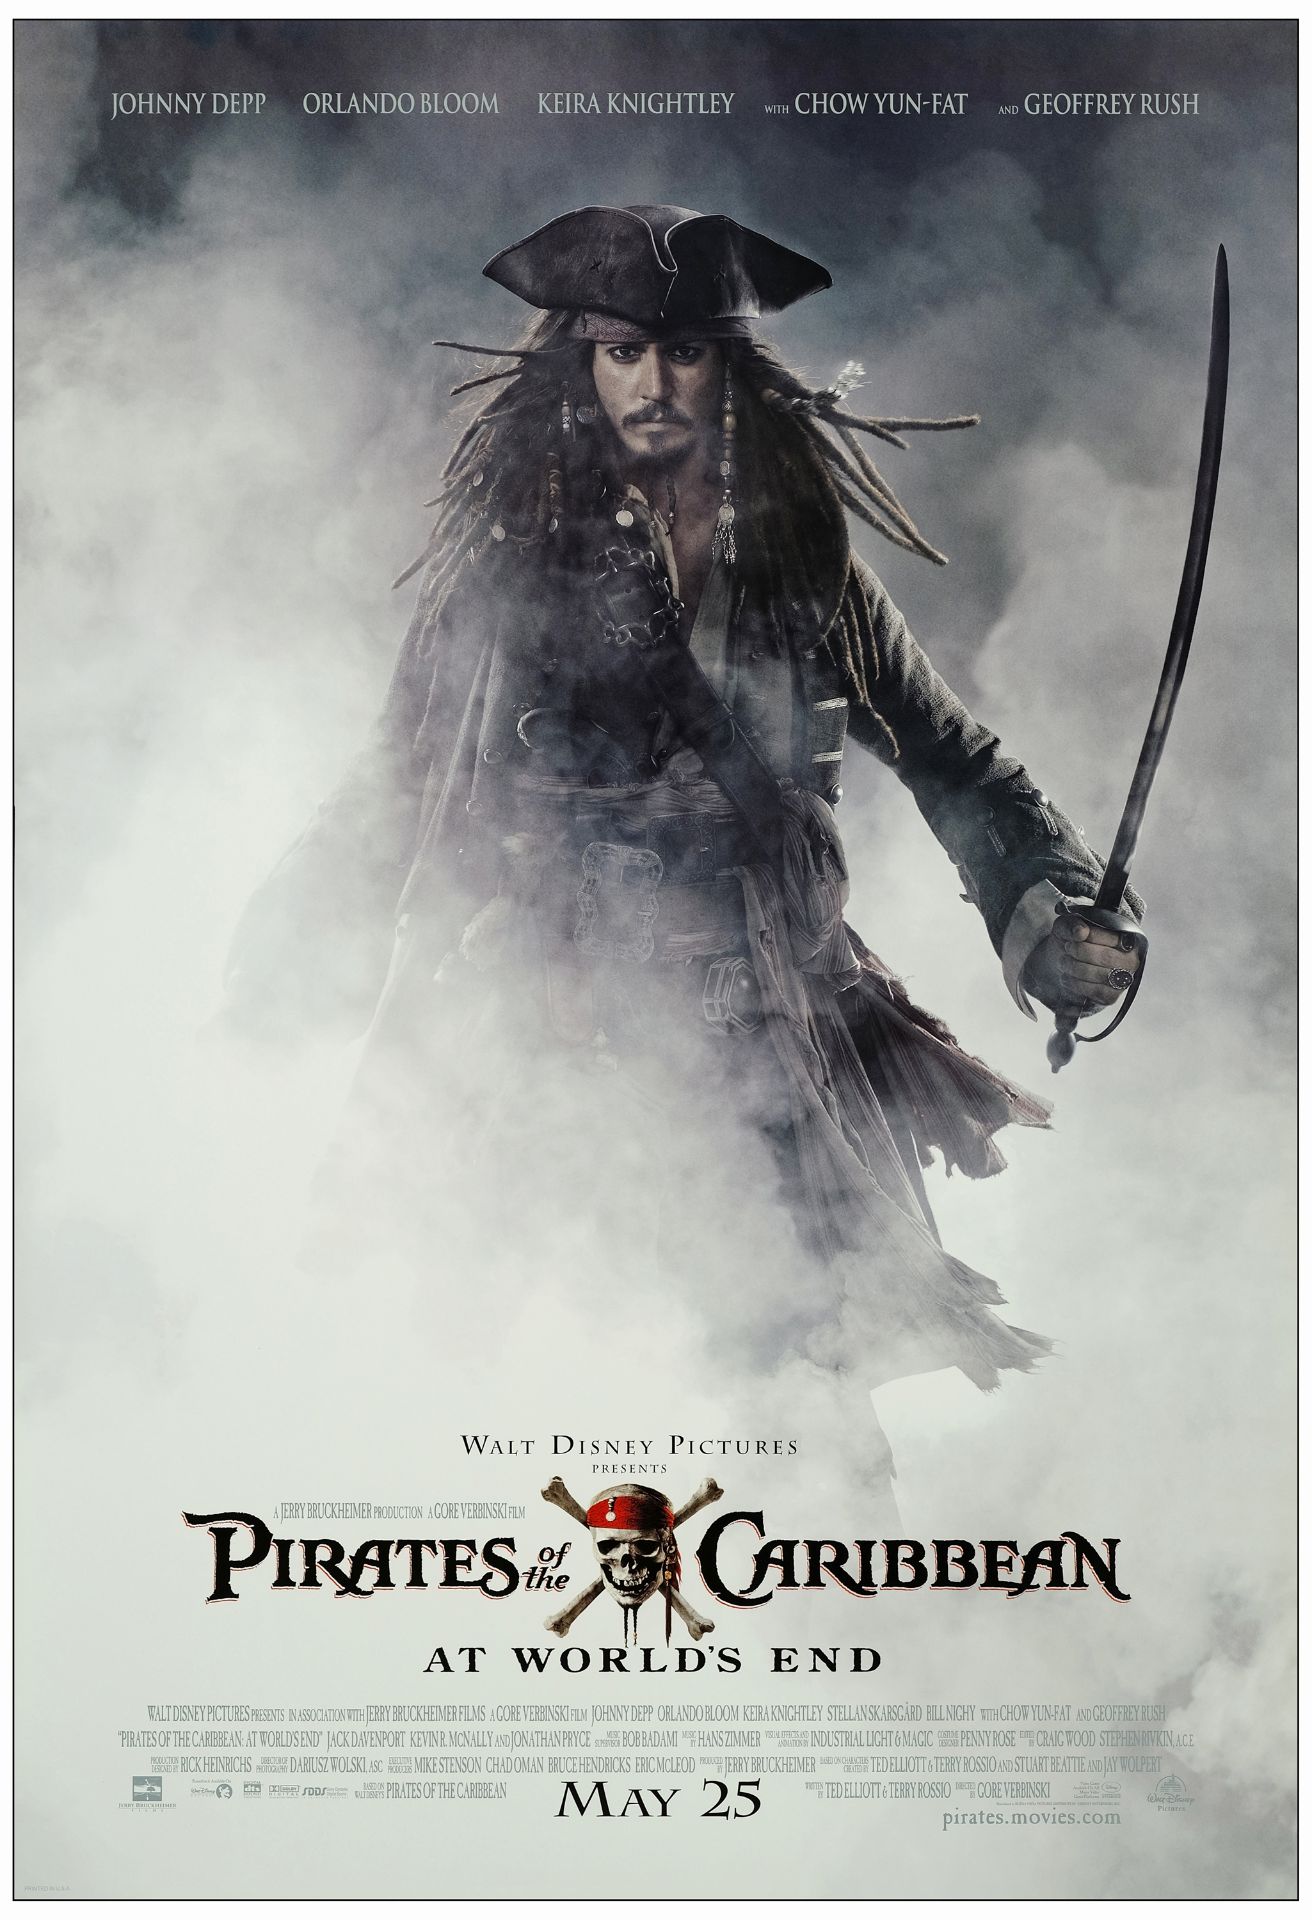 PIRATES OF THE CARIBBEAN: THE CURSE OF THE BLACK PEARL, PIRATES OF THE CARIBBEAN: DEAD MAN'S CHEST, - Image 3 of 5